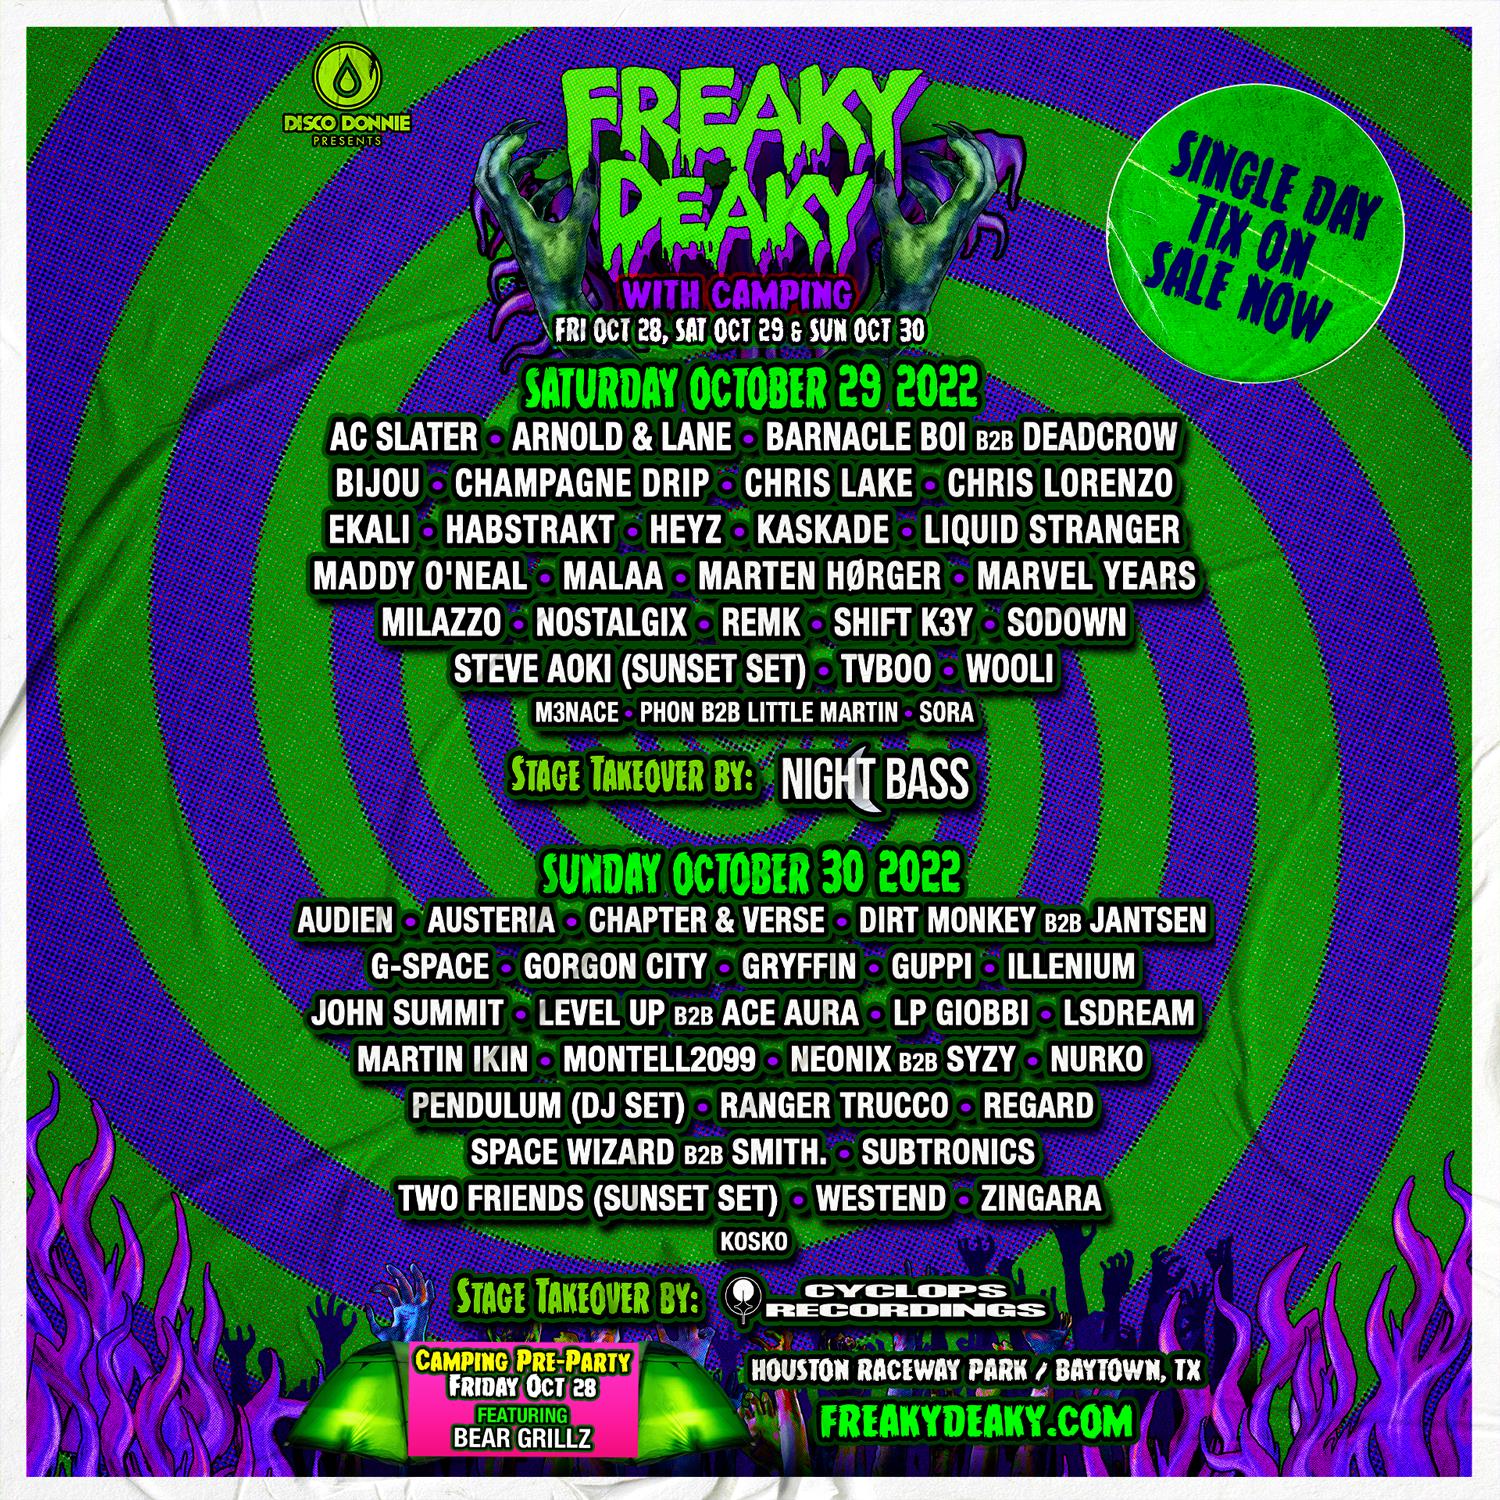 Twoday ‘Freaky Deaky’ music festival this weekend CW39 Houston